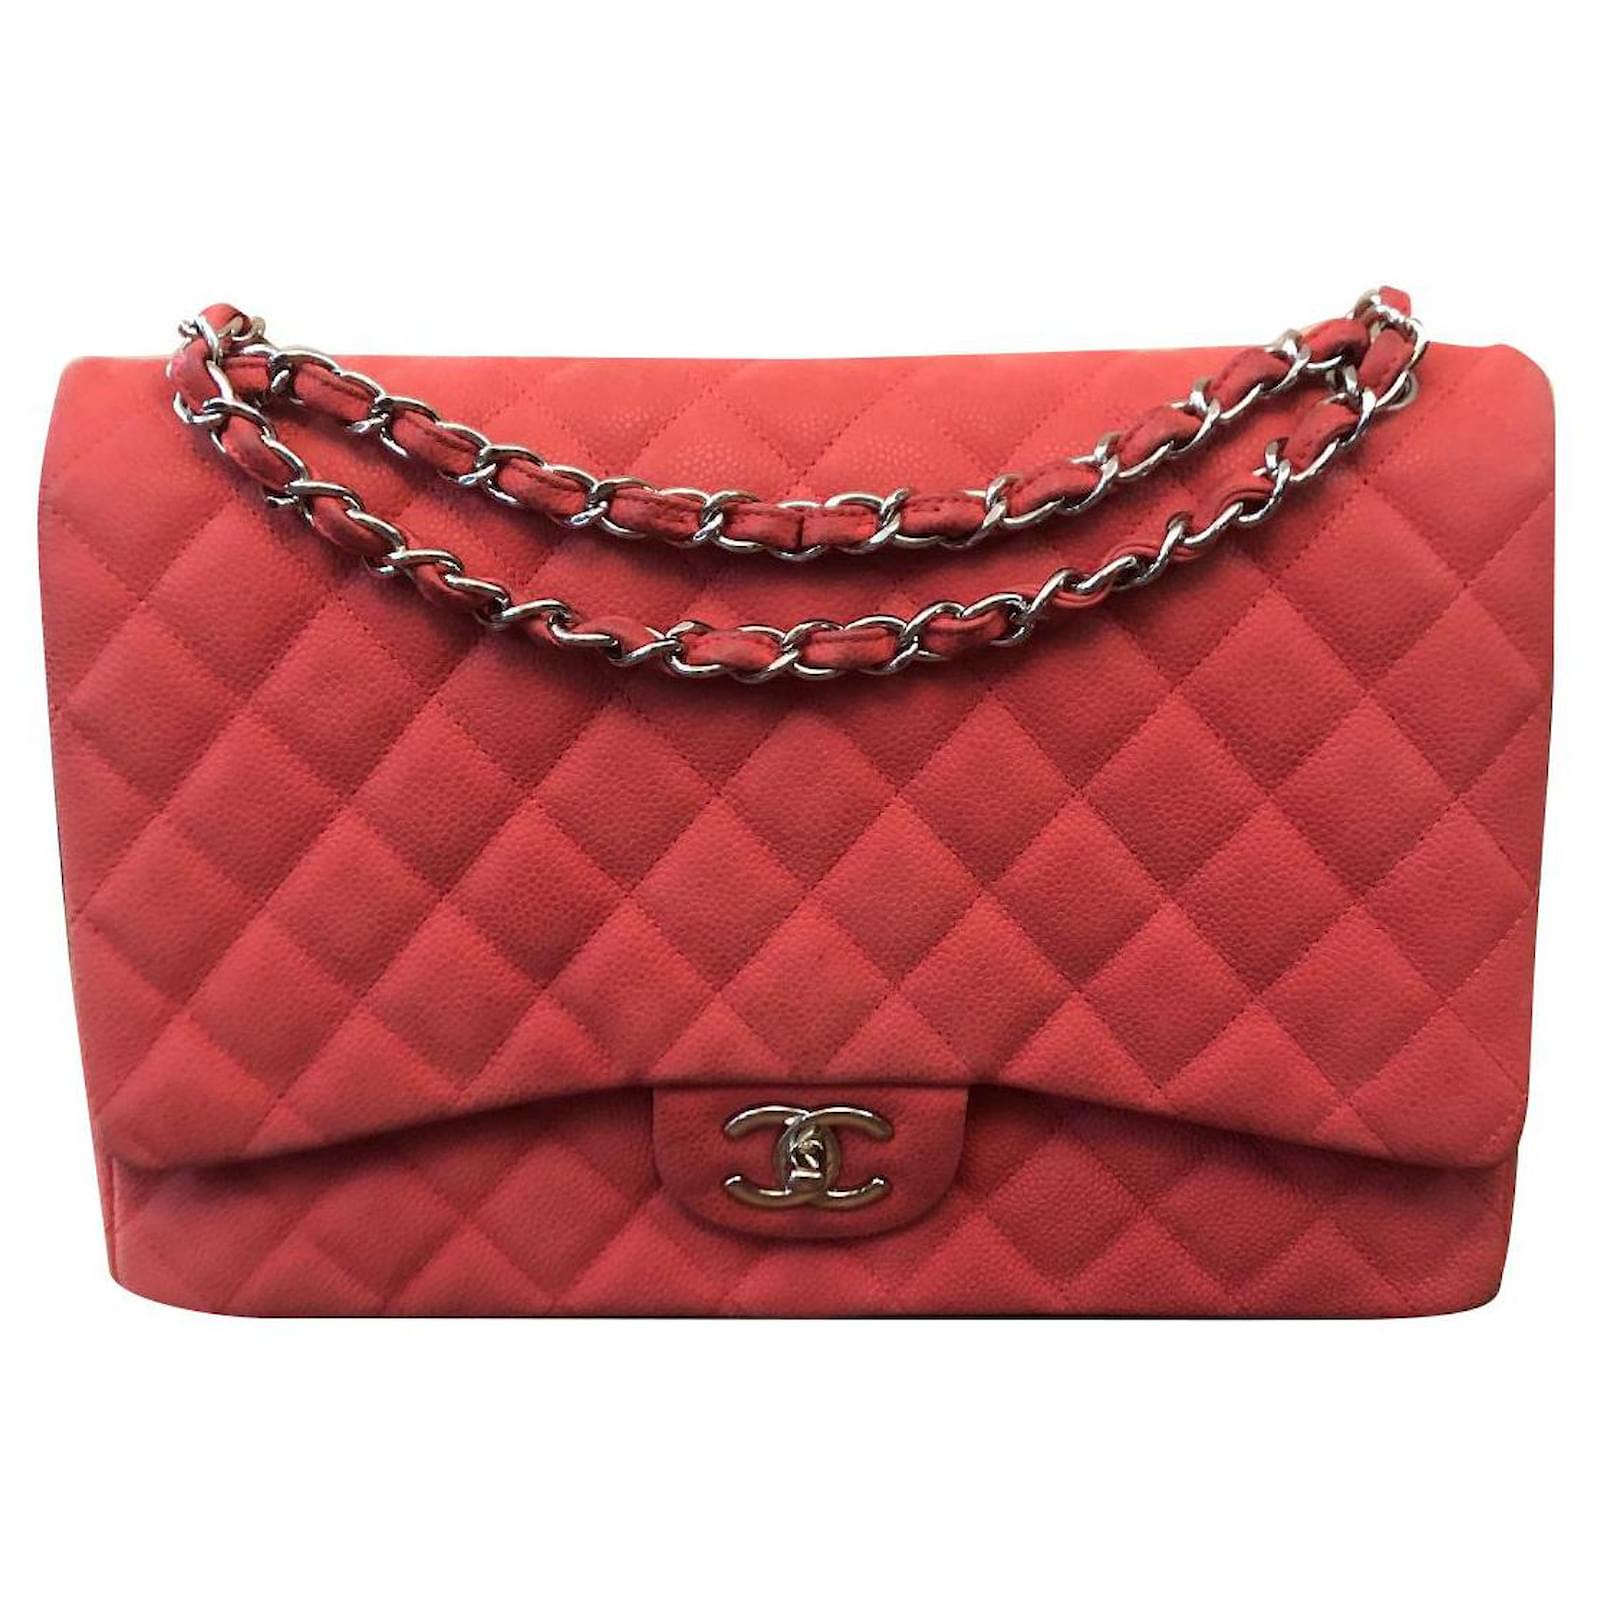 Chanel Pink Matte Caviar Leather Maxi Timeless Classic lined Flap